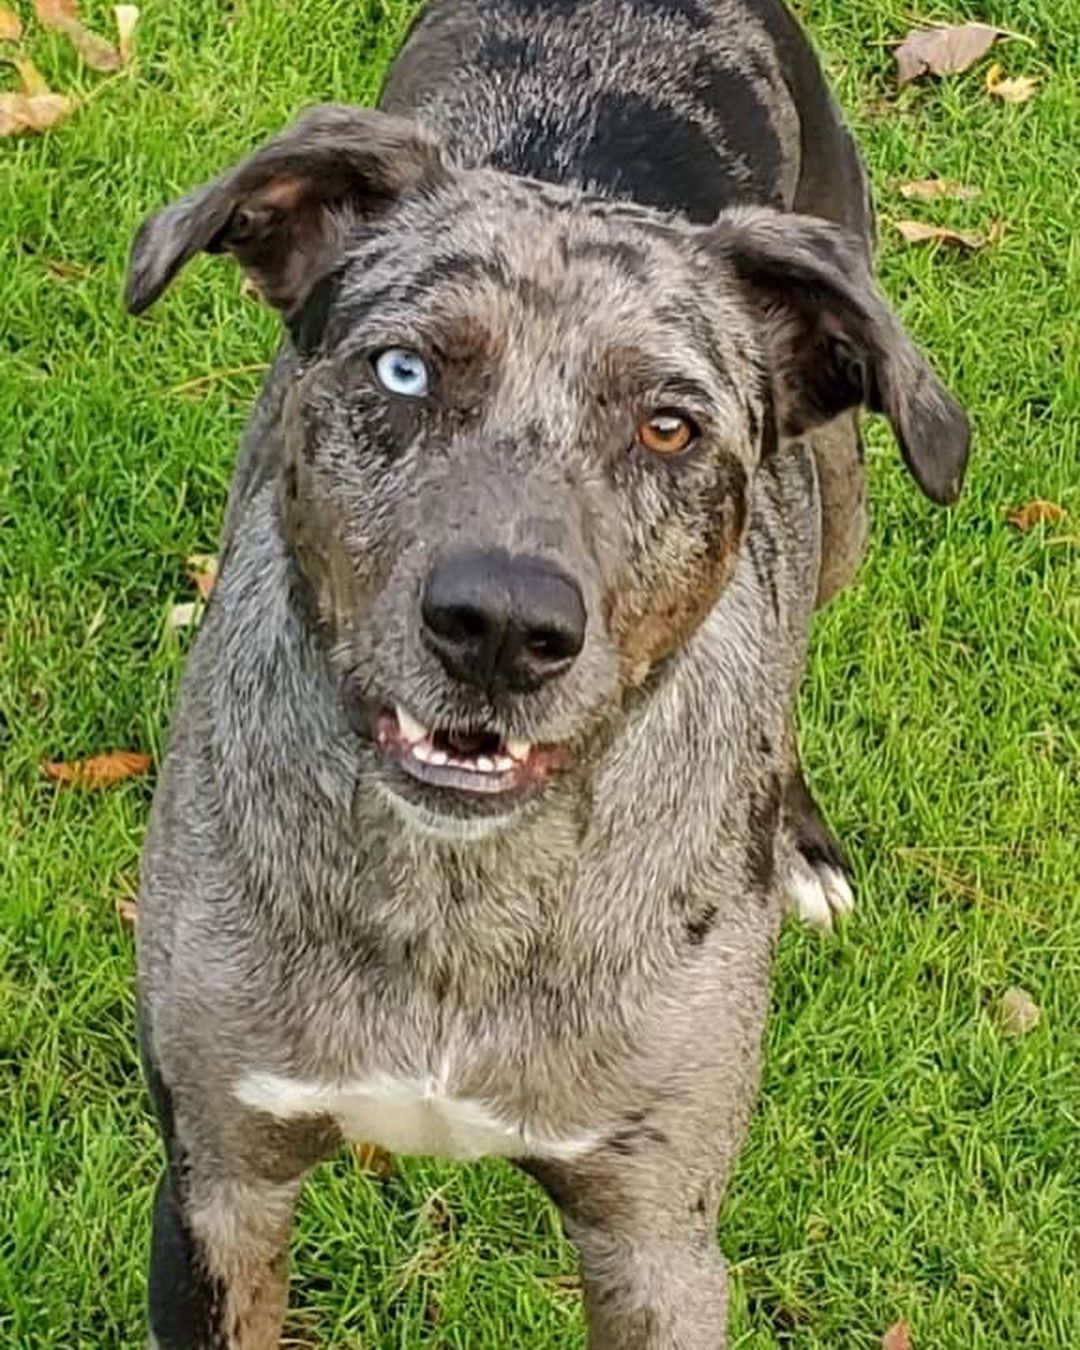 Male Catahoula X possible lab mix in Plattsburgh NY. Up for adoption to a screened approved home. Application on line at www.jcldr.com.  Here is the petfinder link, read more about this fine male dog he is in his prime at 4 years old. Can contact Janeen jj4@midrivers.com but please put in an app first off website. Good place to get a jump start. Then we call you and visit or you can email and then call me. Looking for a forever home for this boy with solid commitment and we will support and stand by you if we are needed.